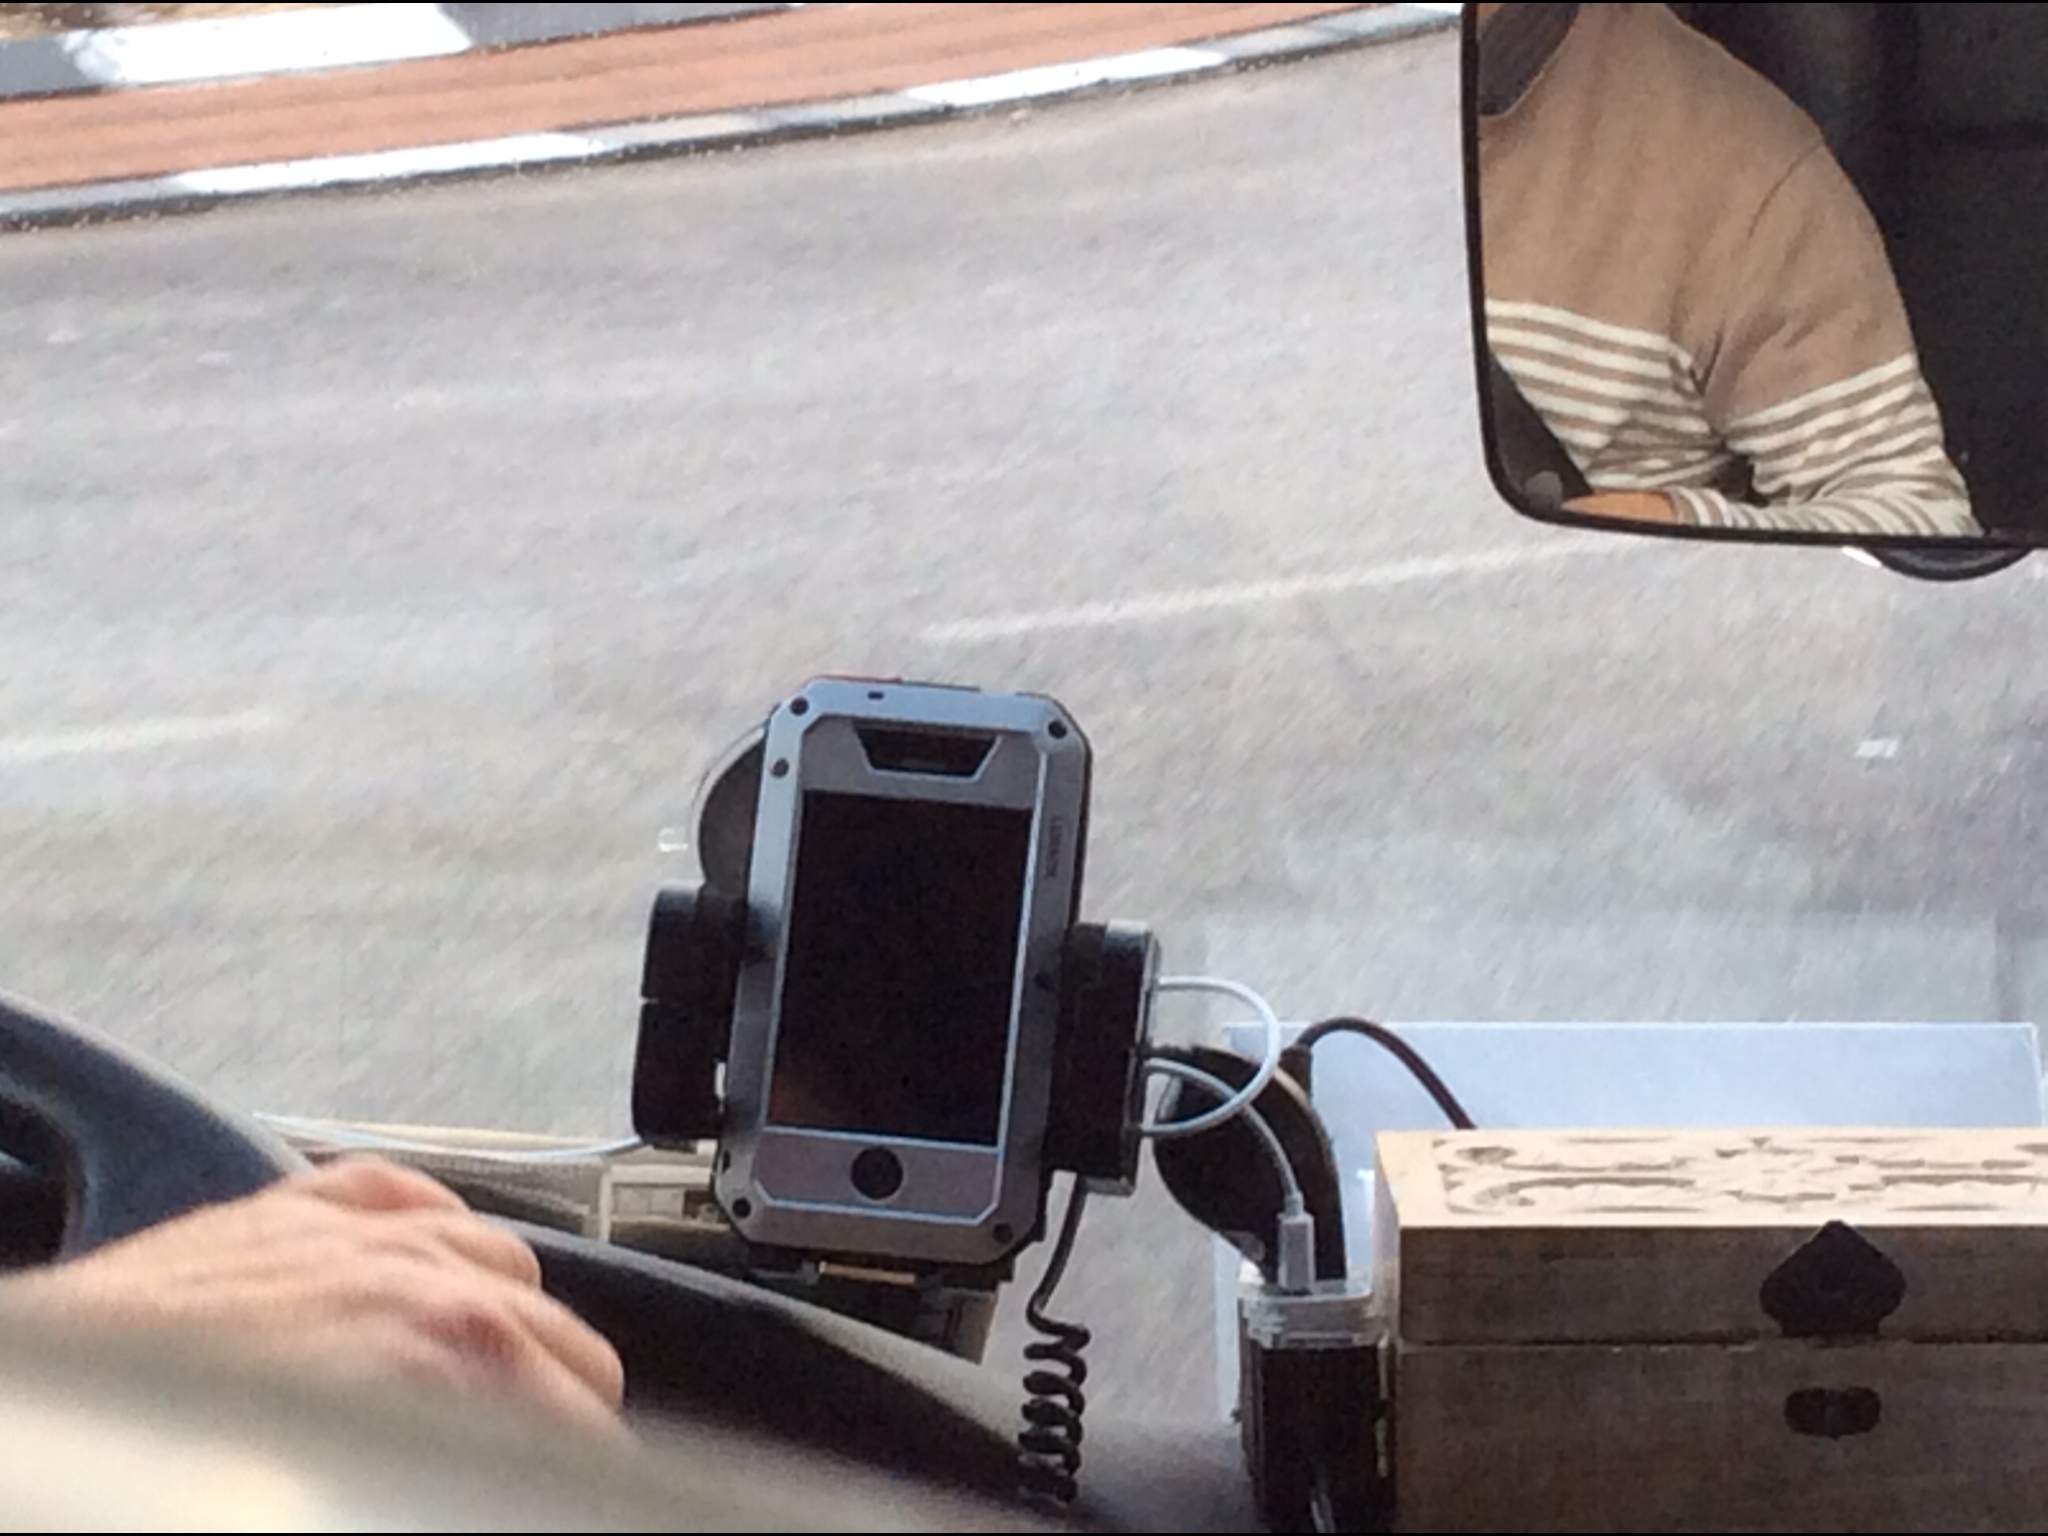 The iPhone 5 Case Was a LunaTik; Fortunately, Our Israeli Bus Driver Wasn't